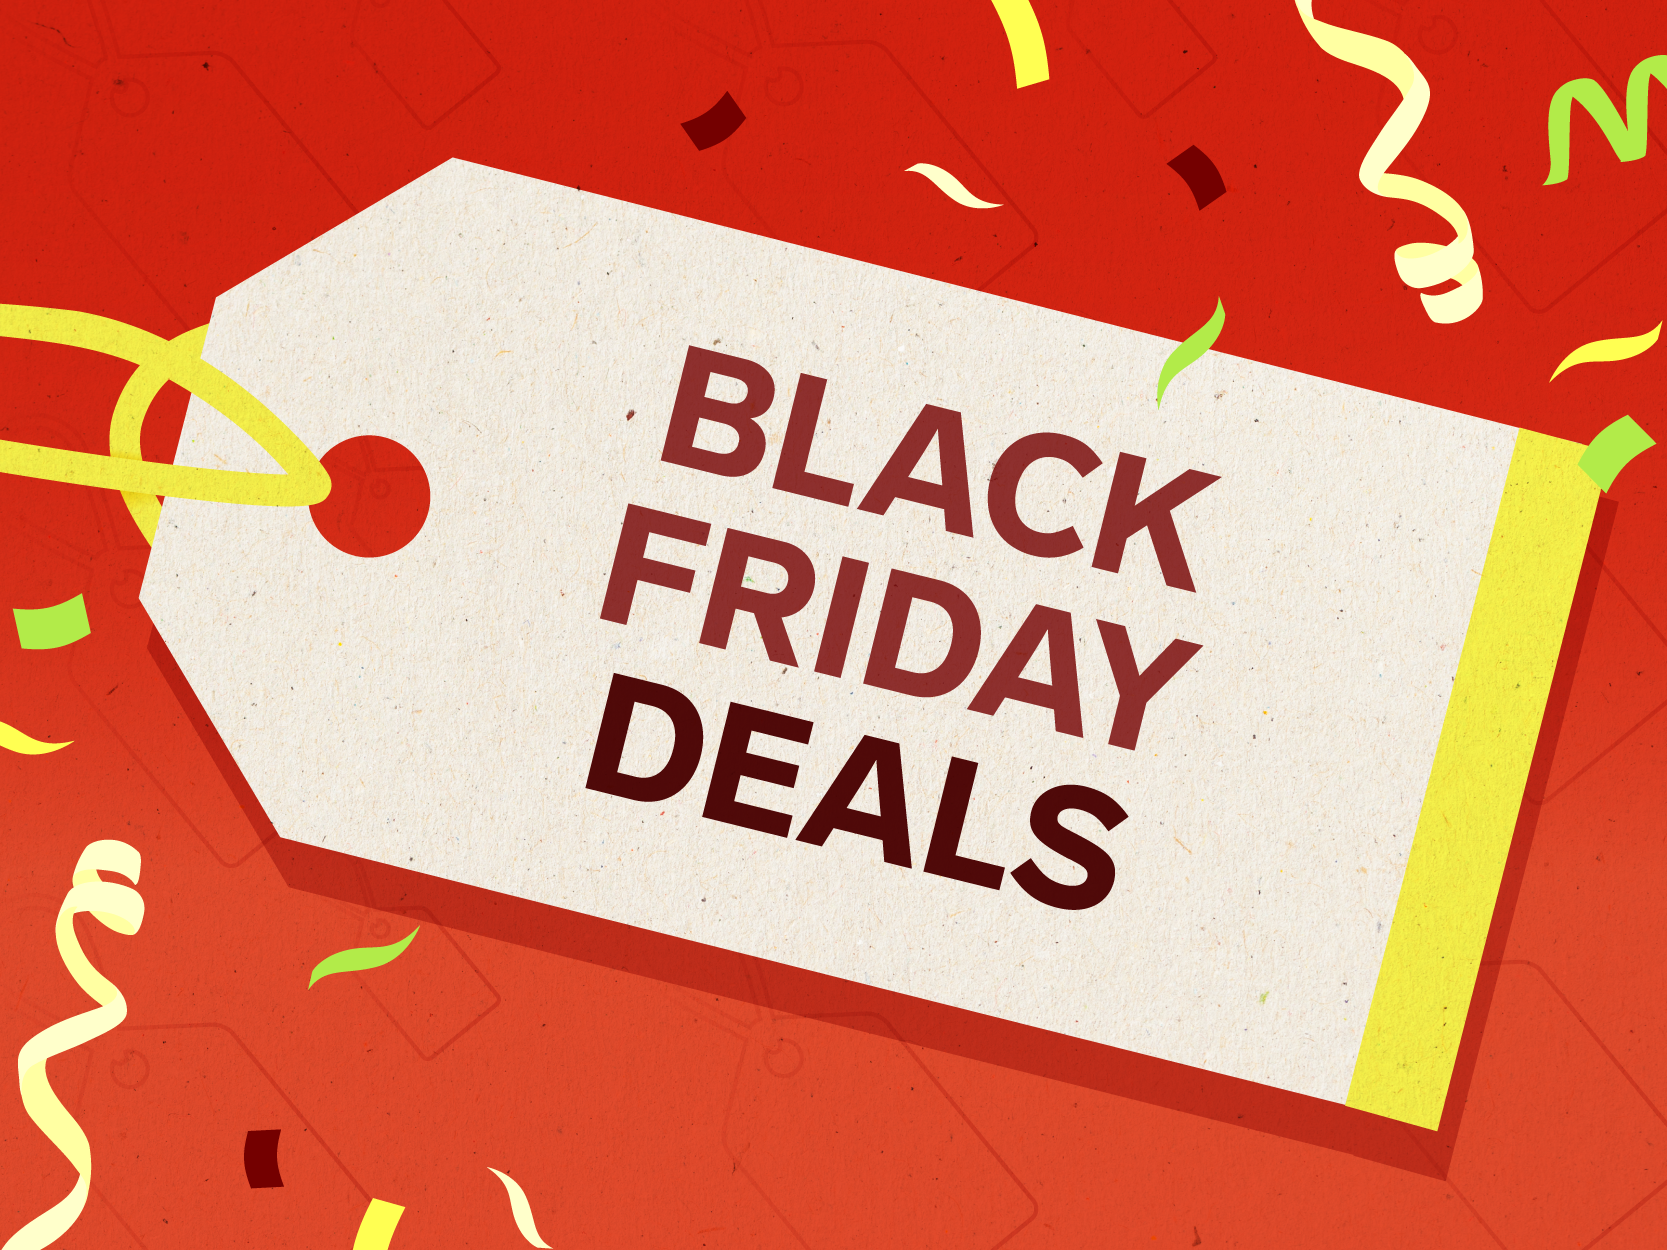 Apple Shadowy Friday offers on AirPods, Apple Watches, and more devices are readily obtainable now — listed below are perhaps the most simple discounts